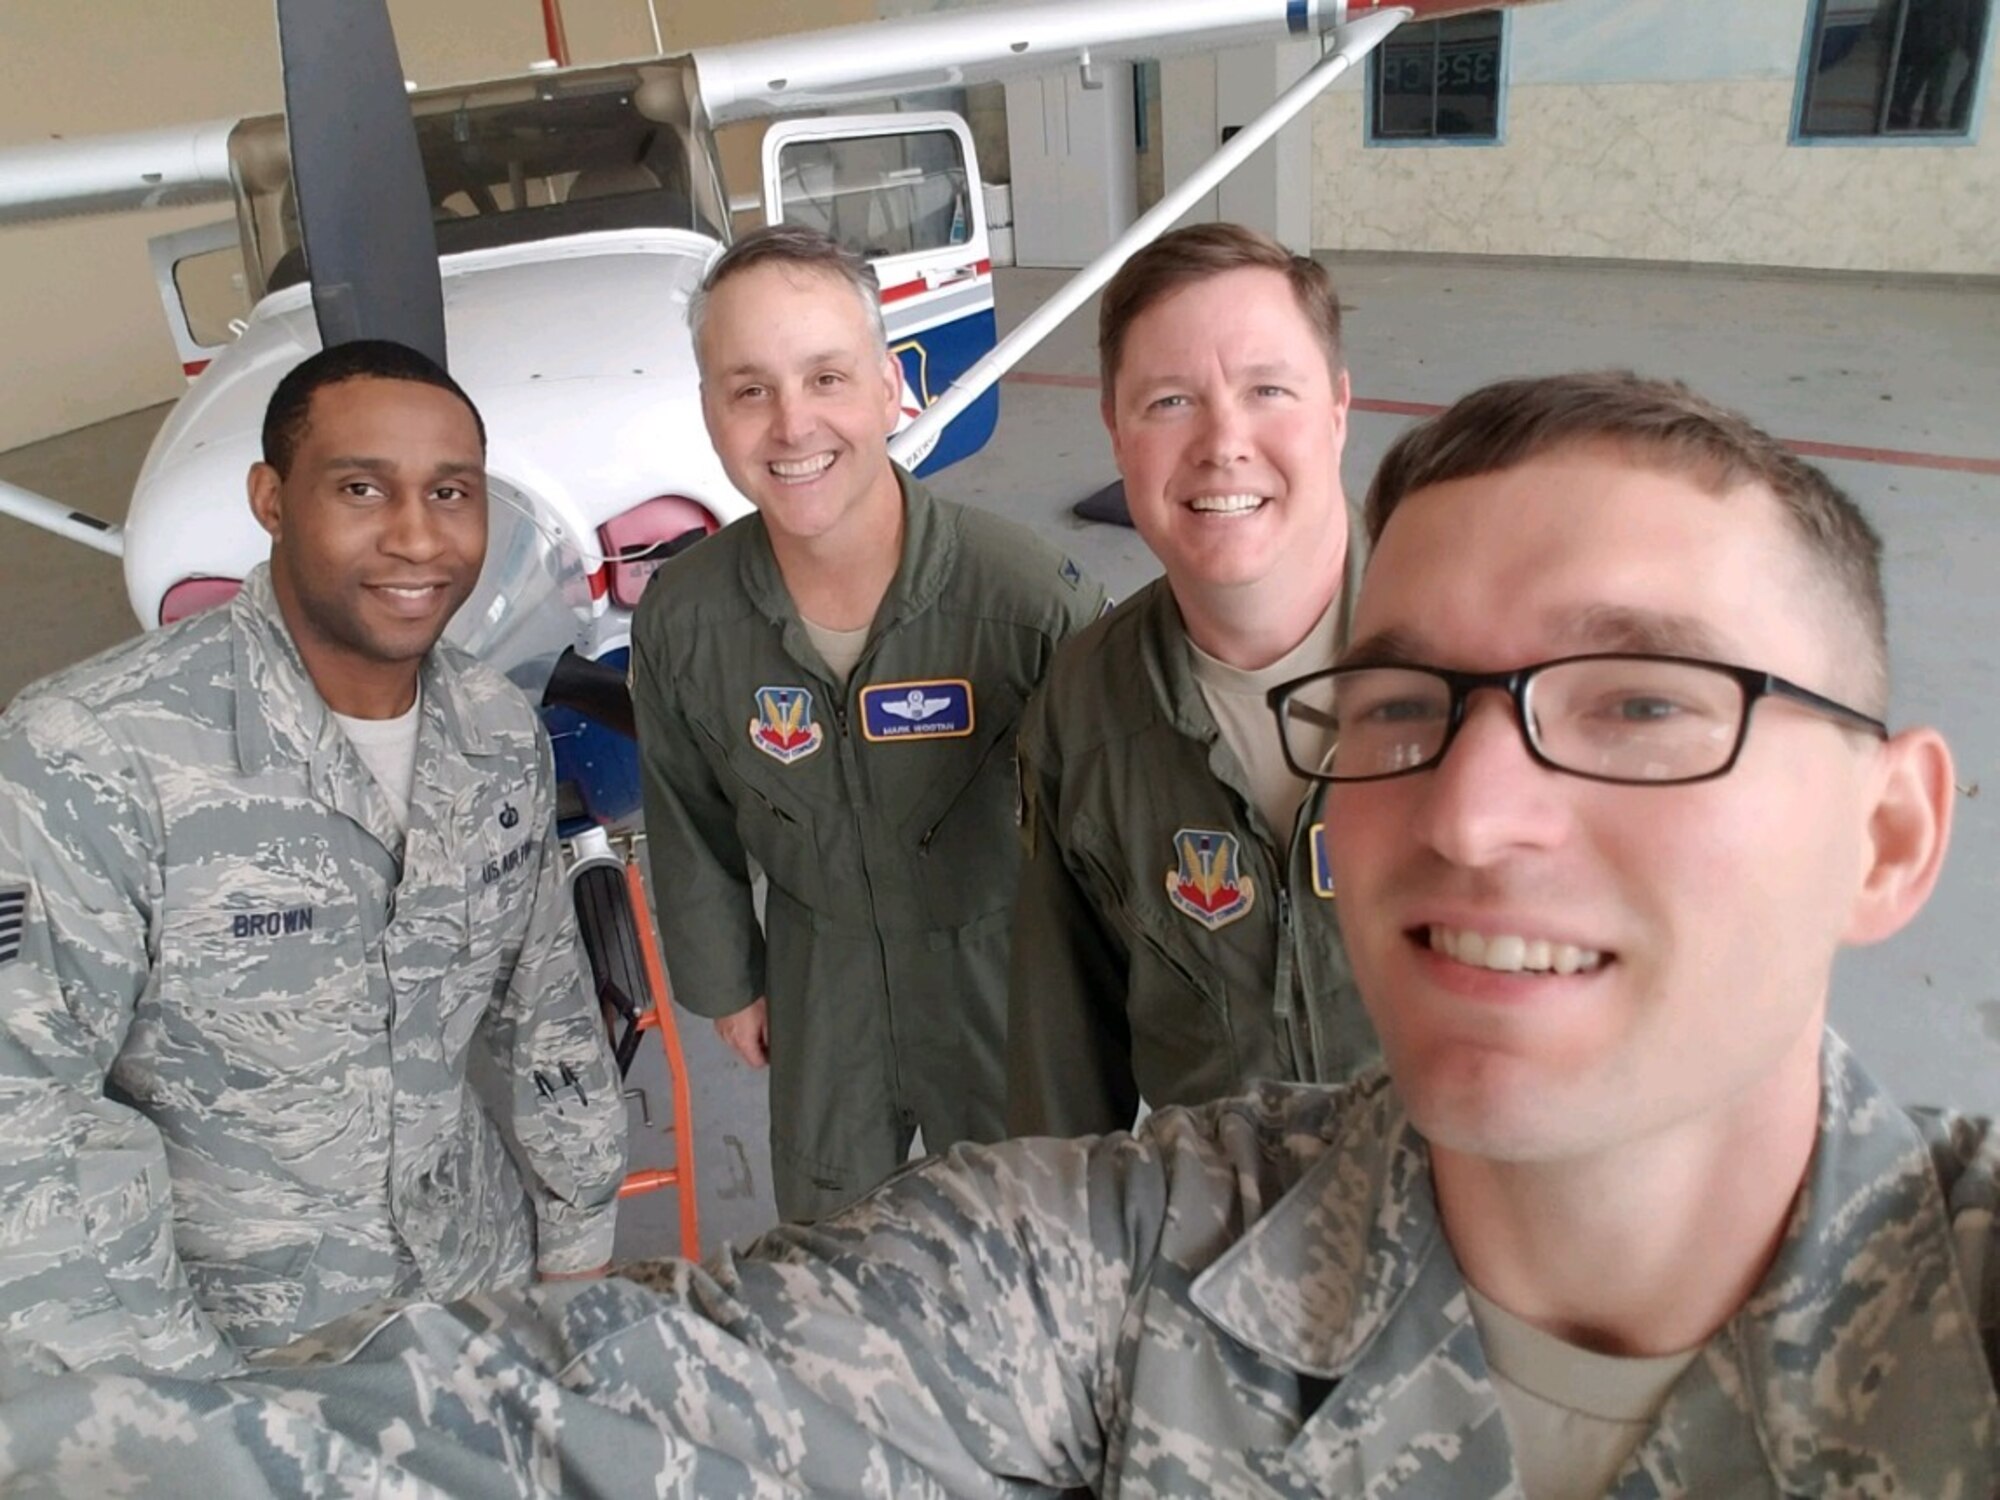 Tech. Sgt. Ben Brown (far left), and Staff Sgt. Aaron Pearson (far right), both subject matter experts from the Business and Enterprise Systems Directorate, receive servers from Tyndall Air Force Base, that were delivered by members of the Civil Air Patrol (courtesy photo).